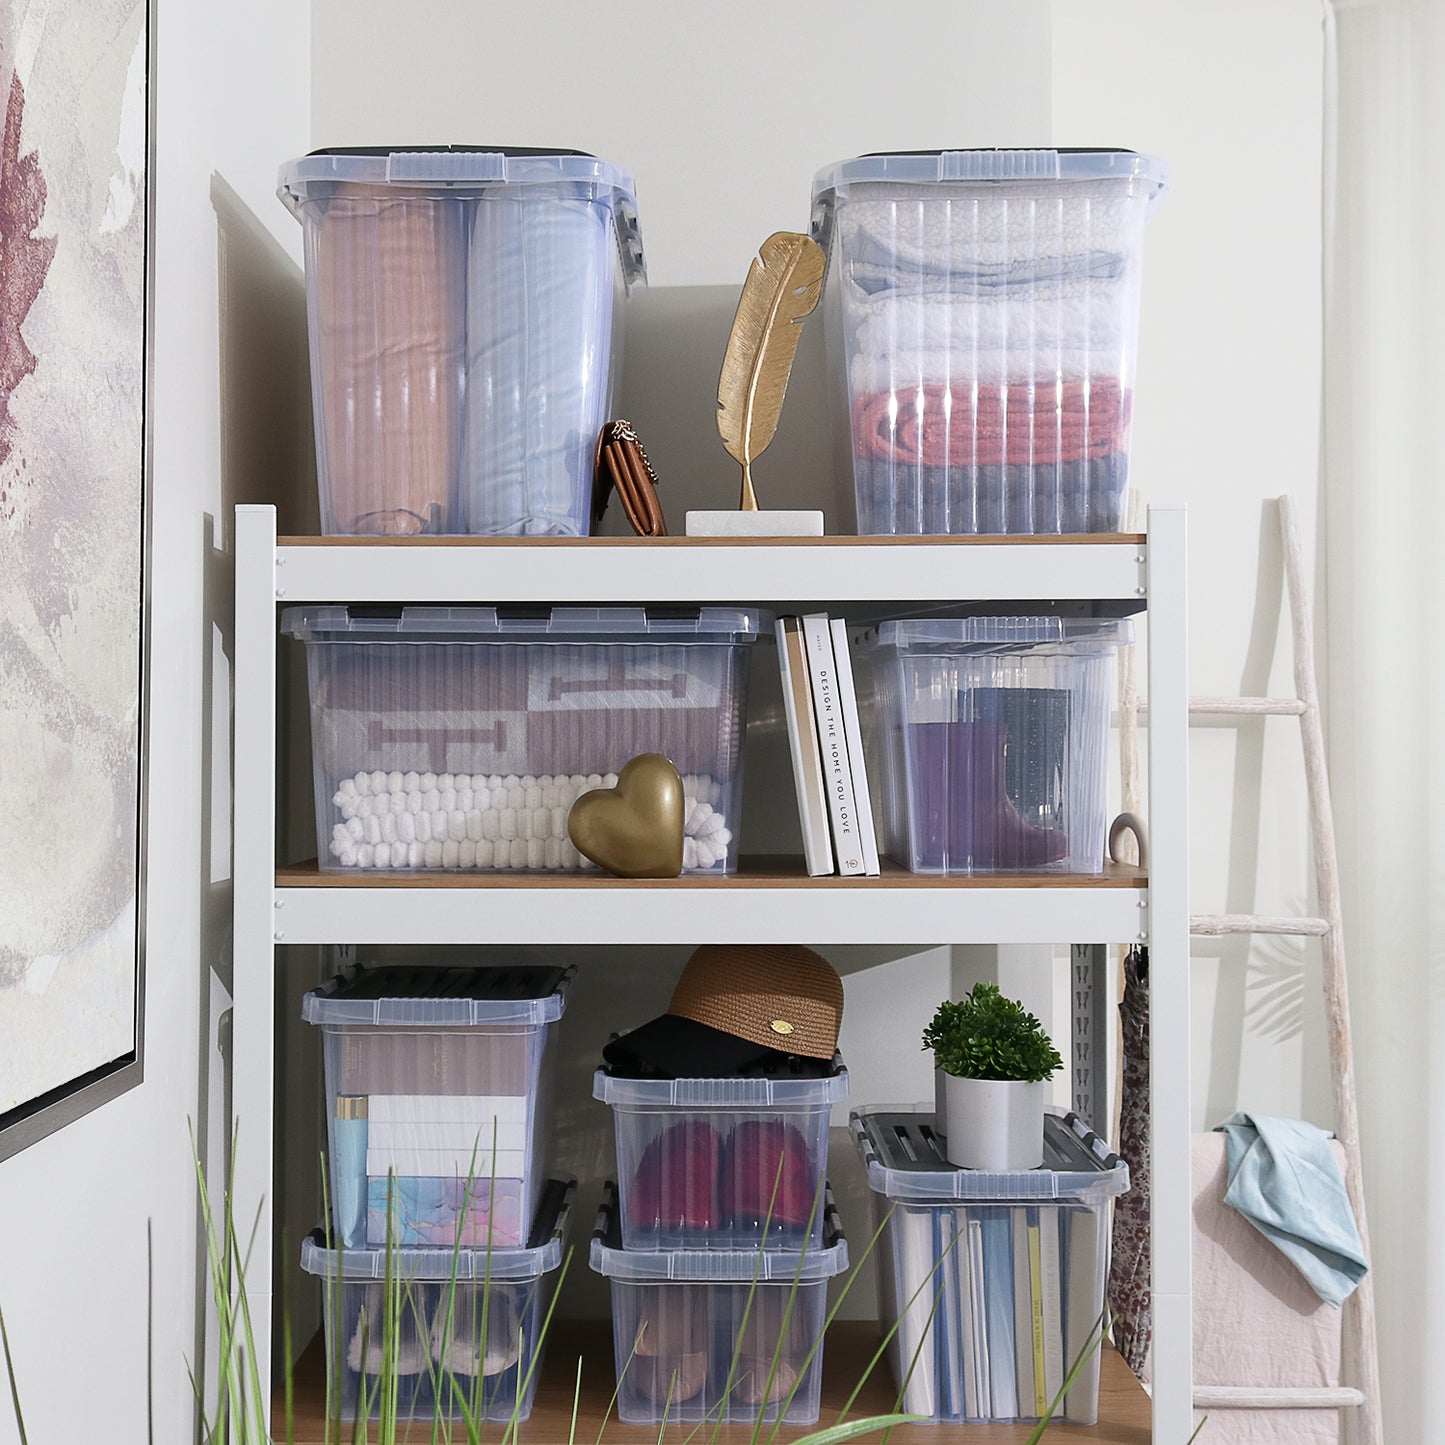 18 L Storage Container with Hinged Lid